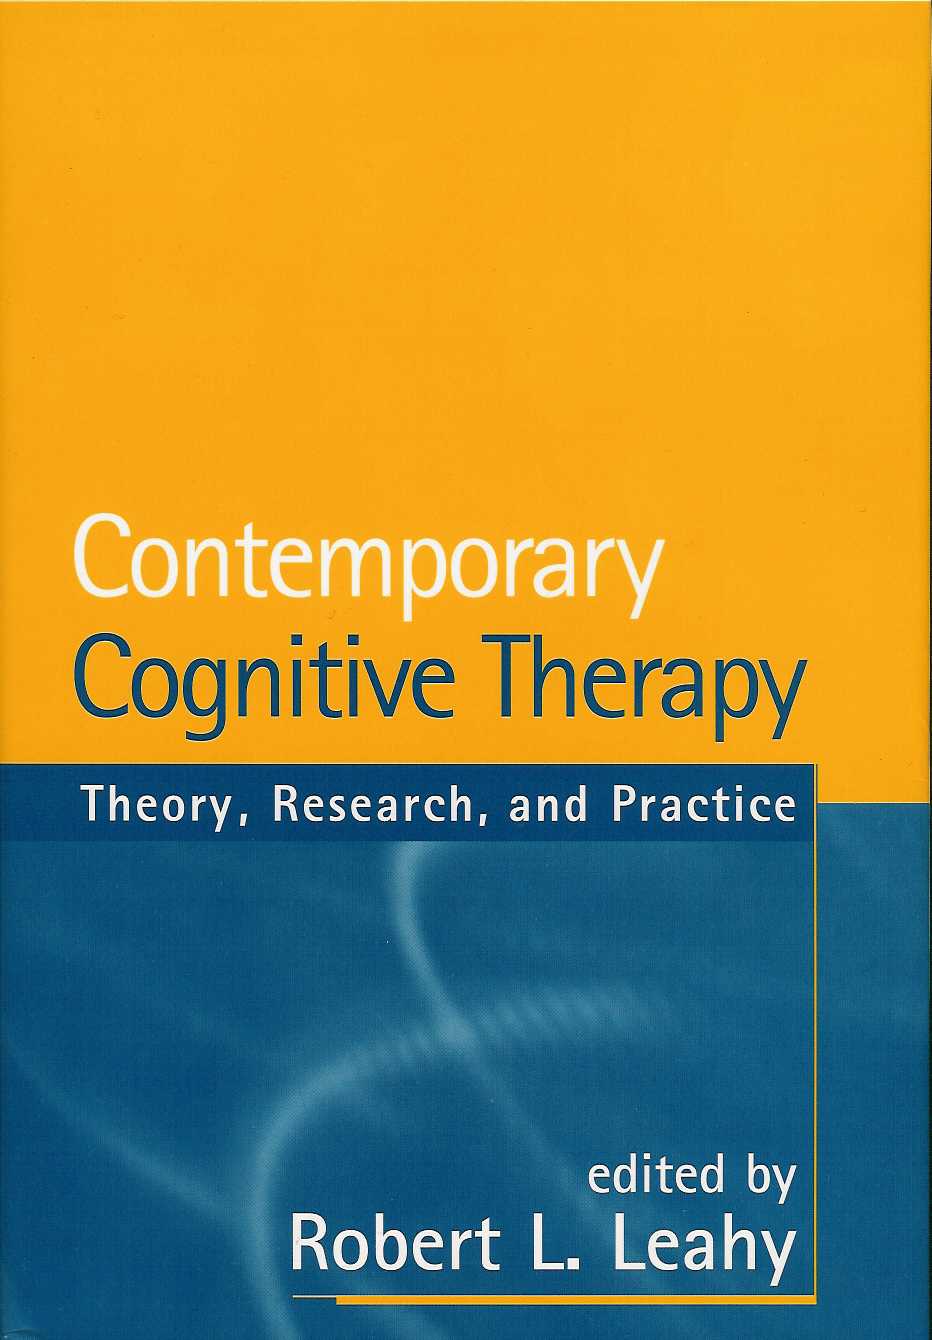 Contemporary Cognitive Therapy book cover